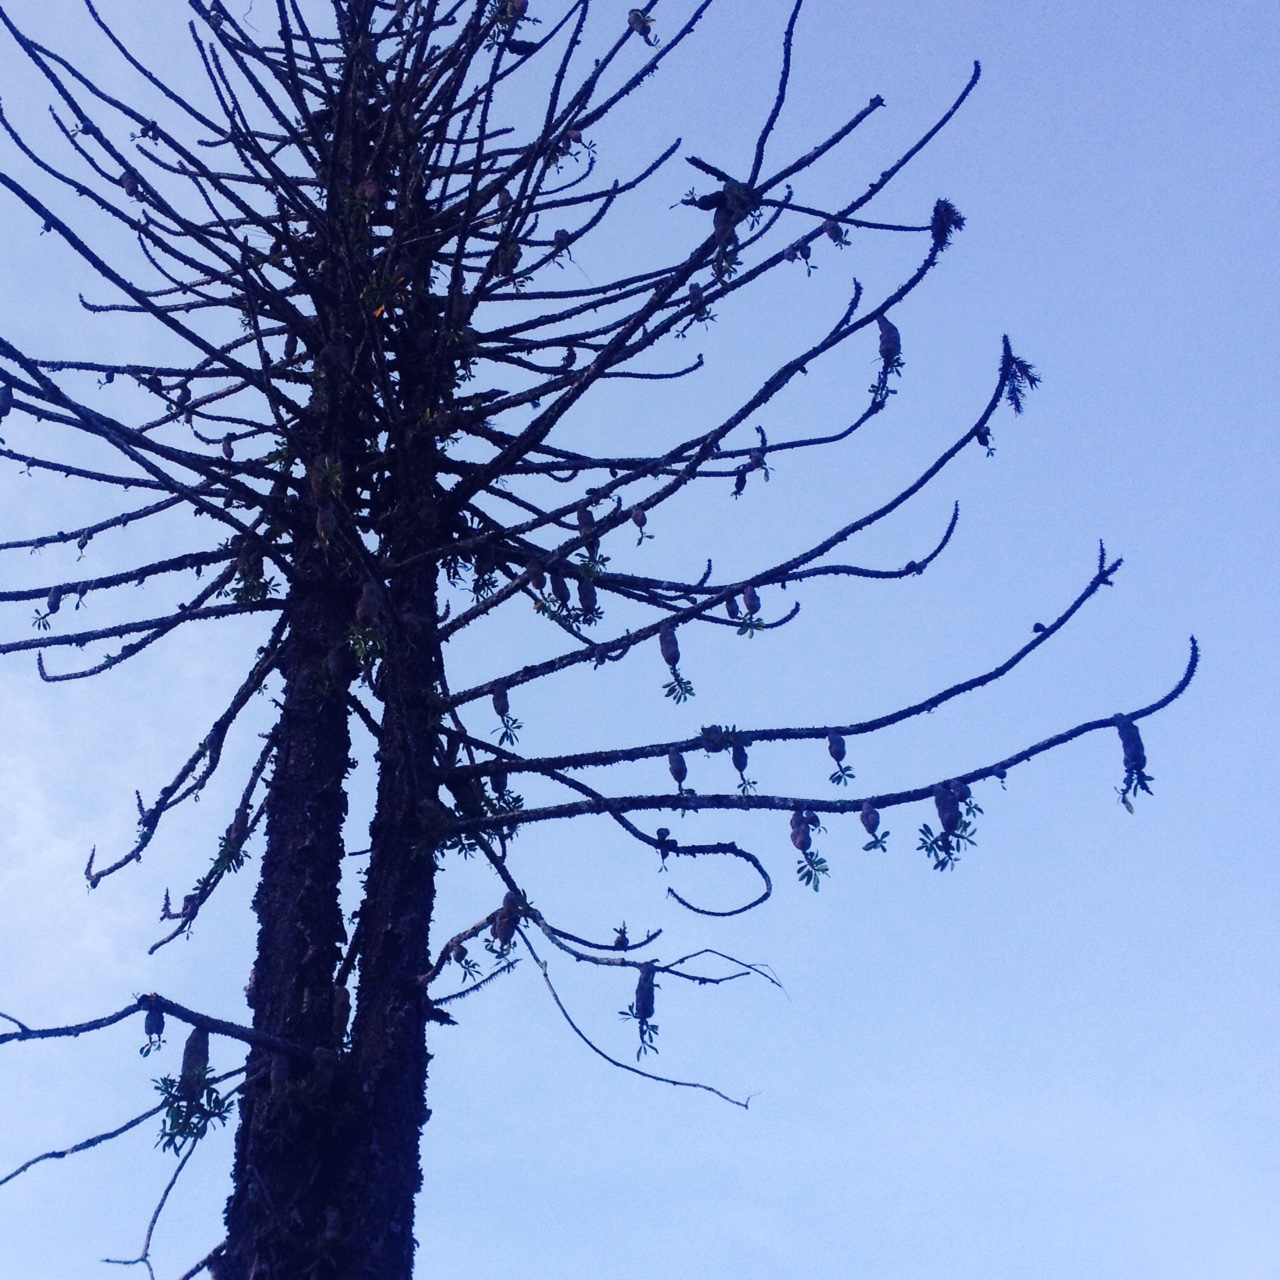  I was amazed at the number of orchids that had made their home in this dead pine tree. 